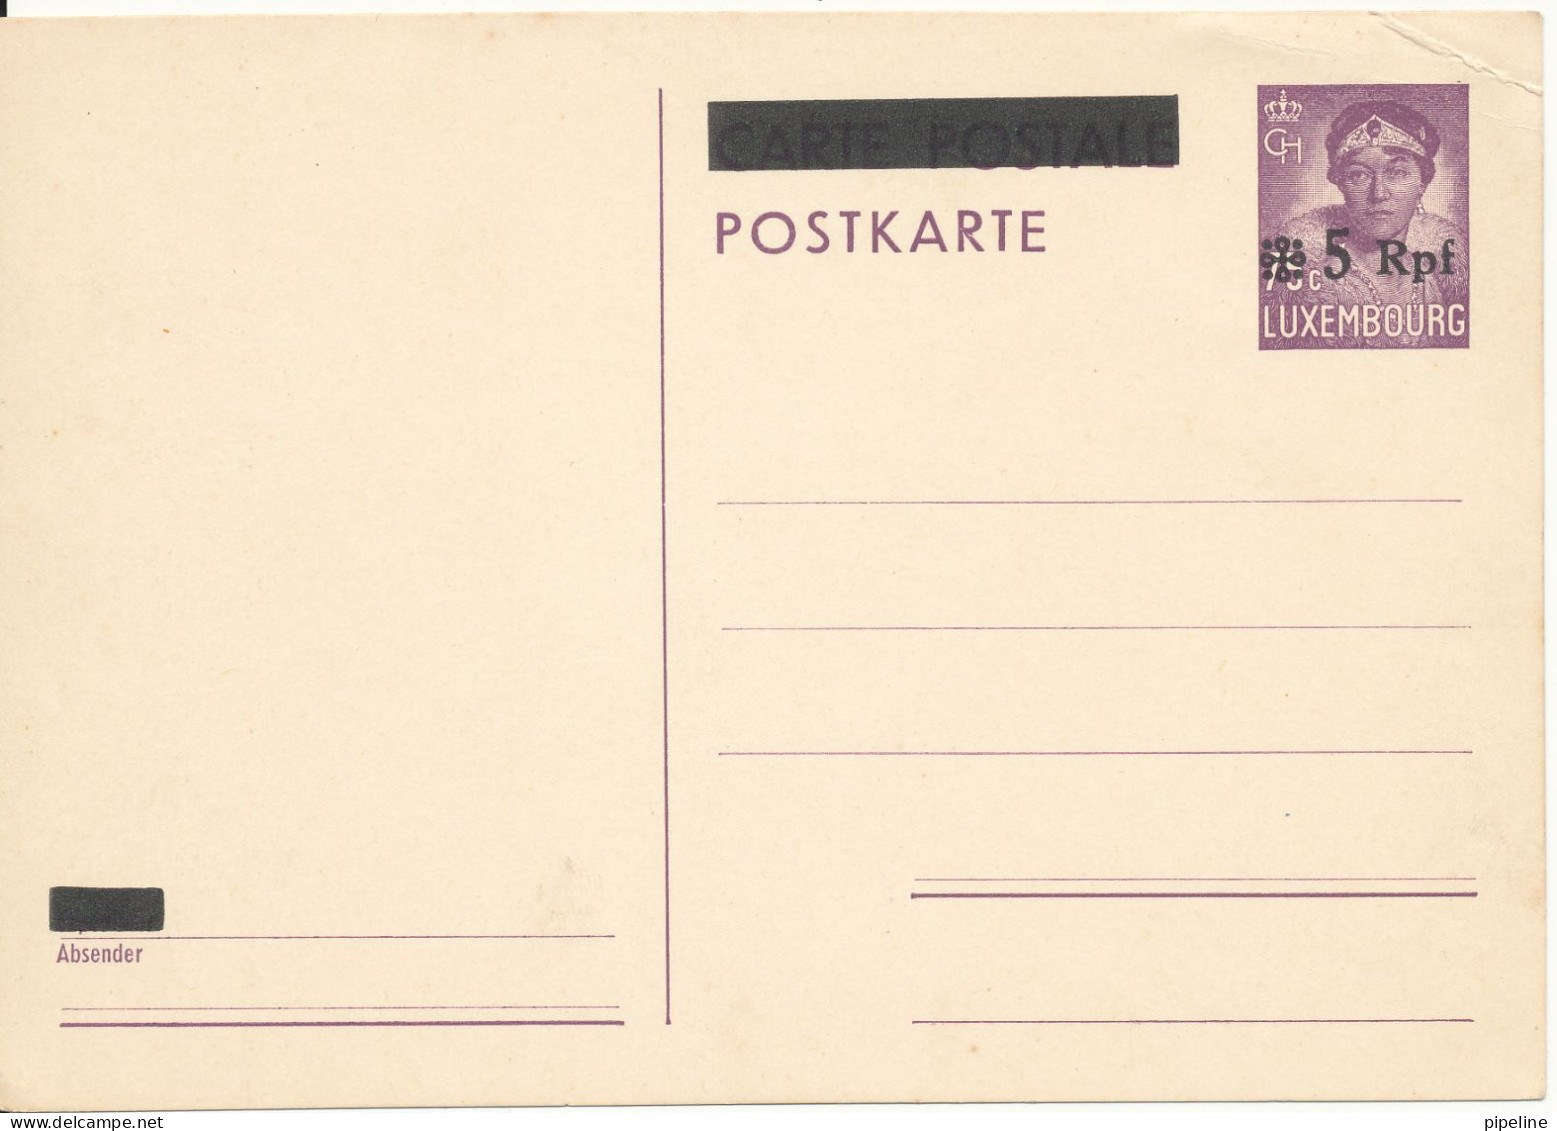 Luxembourg Postal Stationery Postcard Overprinted In Mint Condition (a Weak Corner Of The Card) - Stamped Stationery